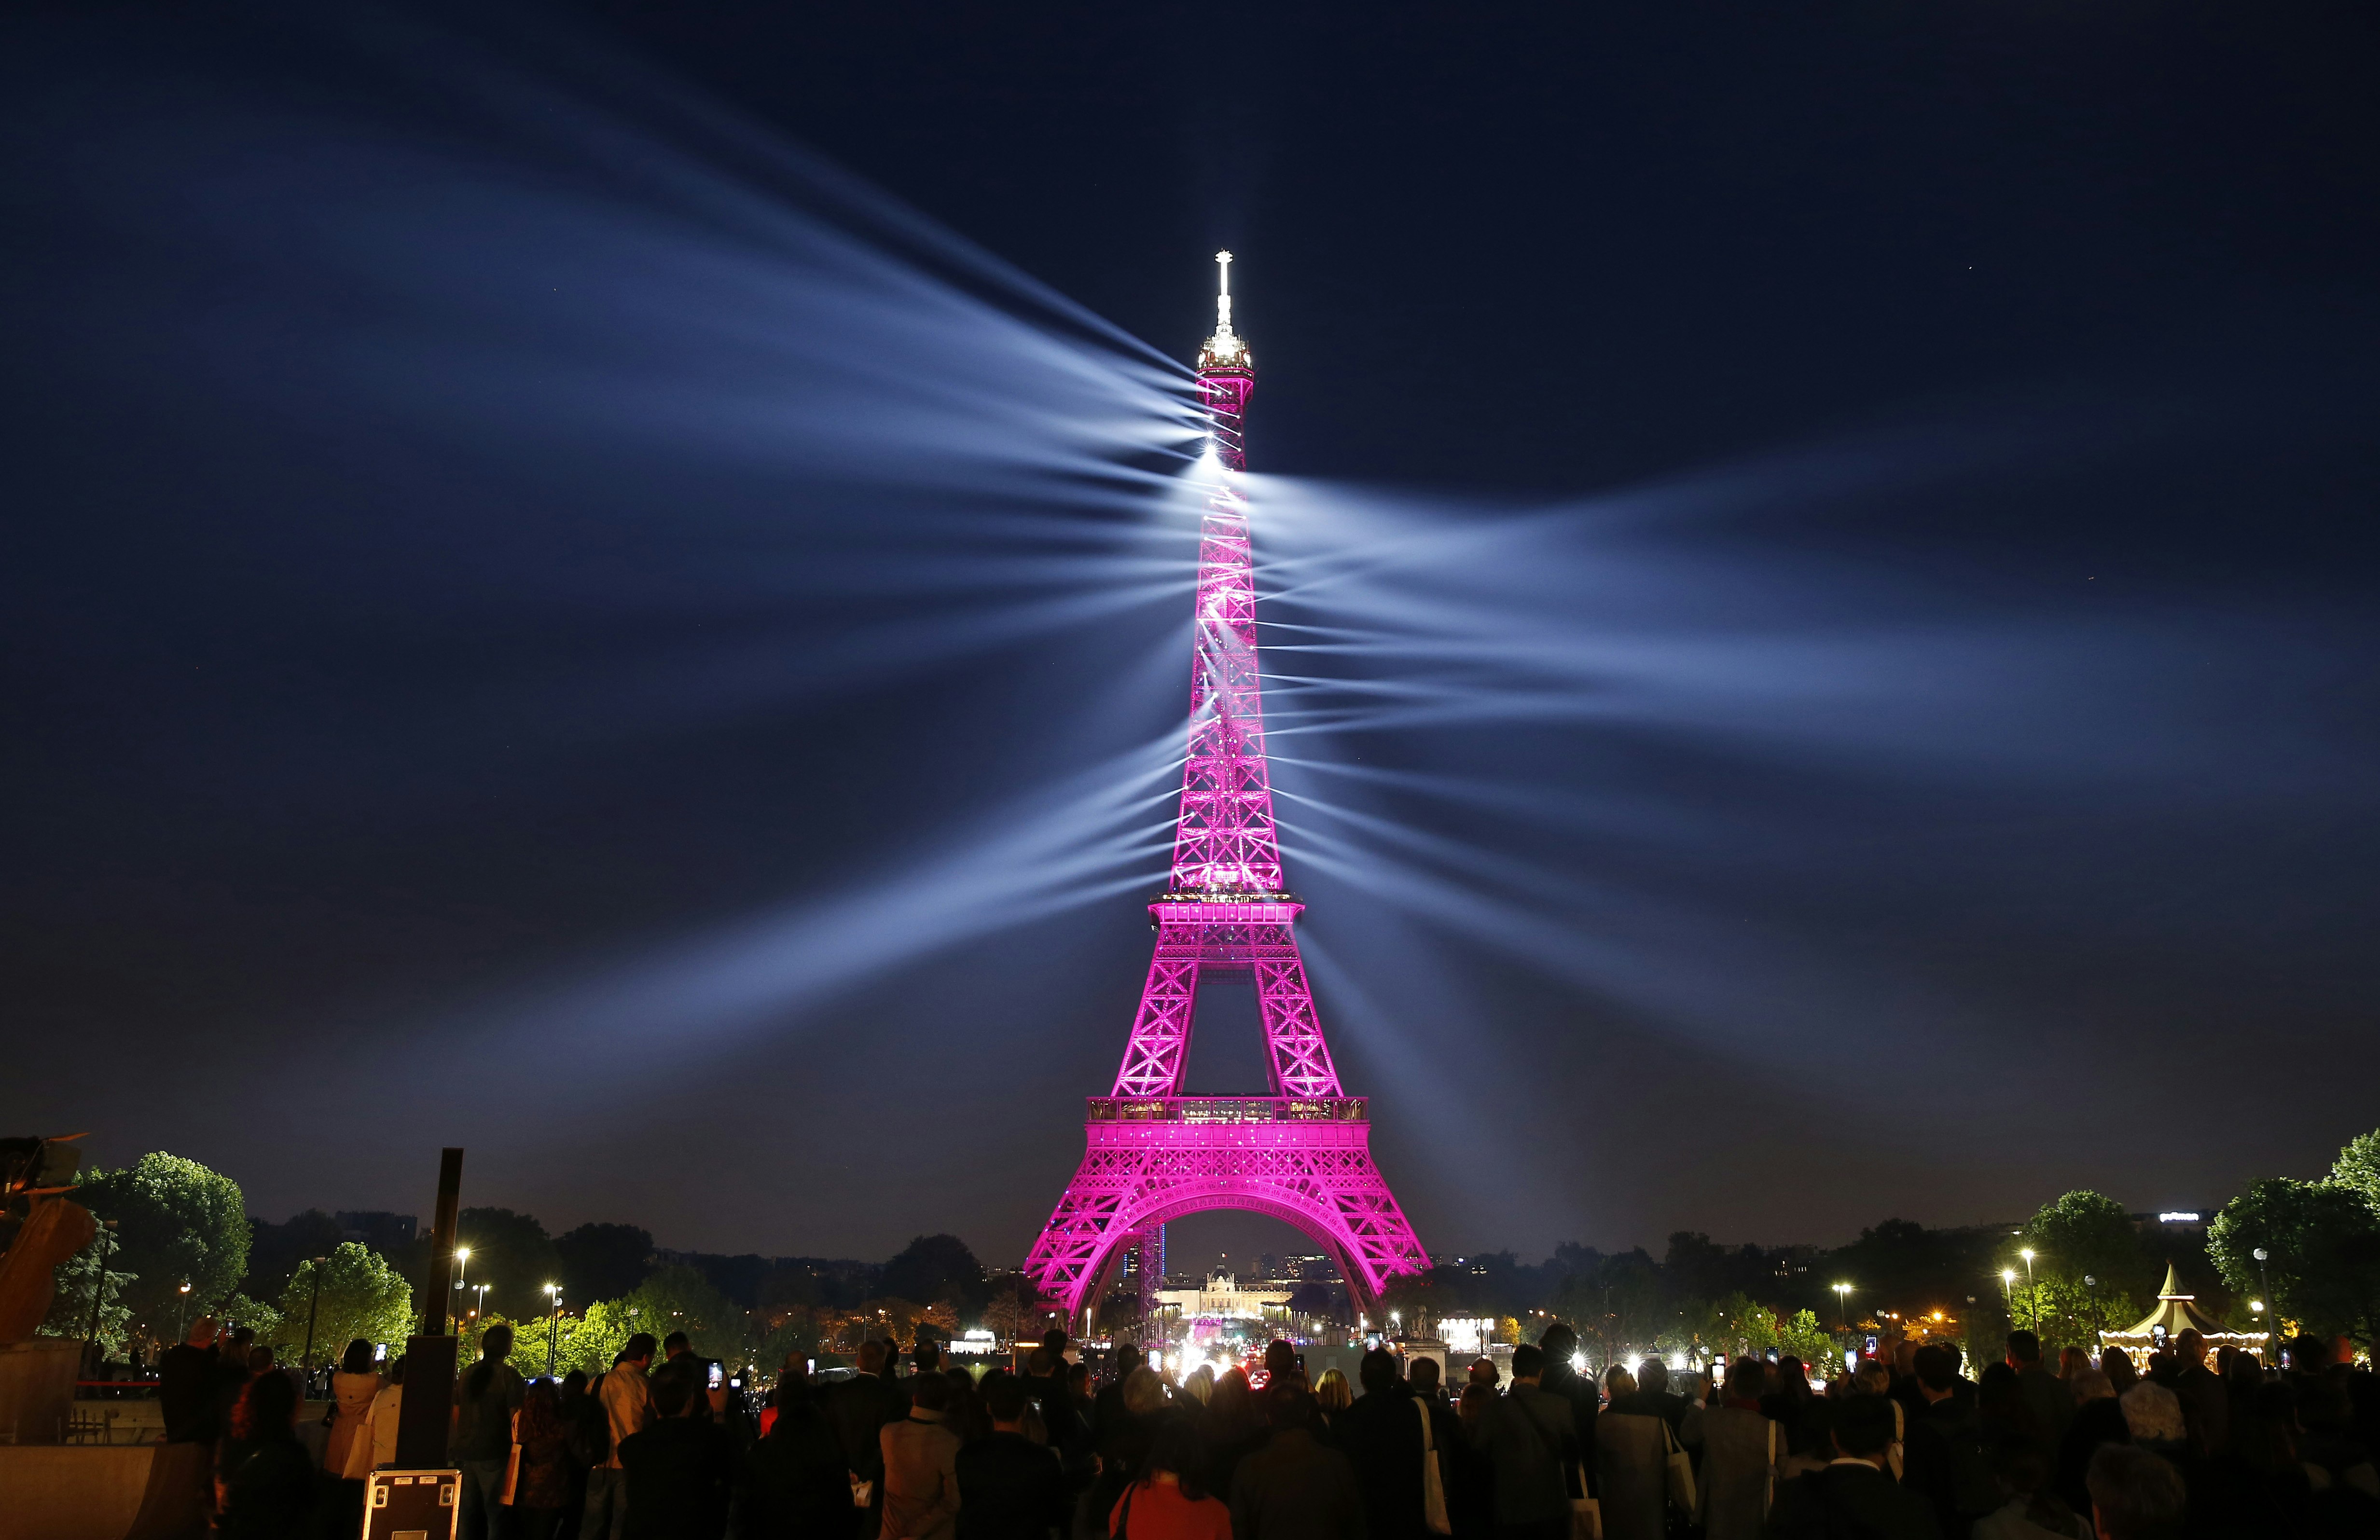 A sound and light show is projected on the Eiffel Tower on May 15, 2019 in Paris, France.